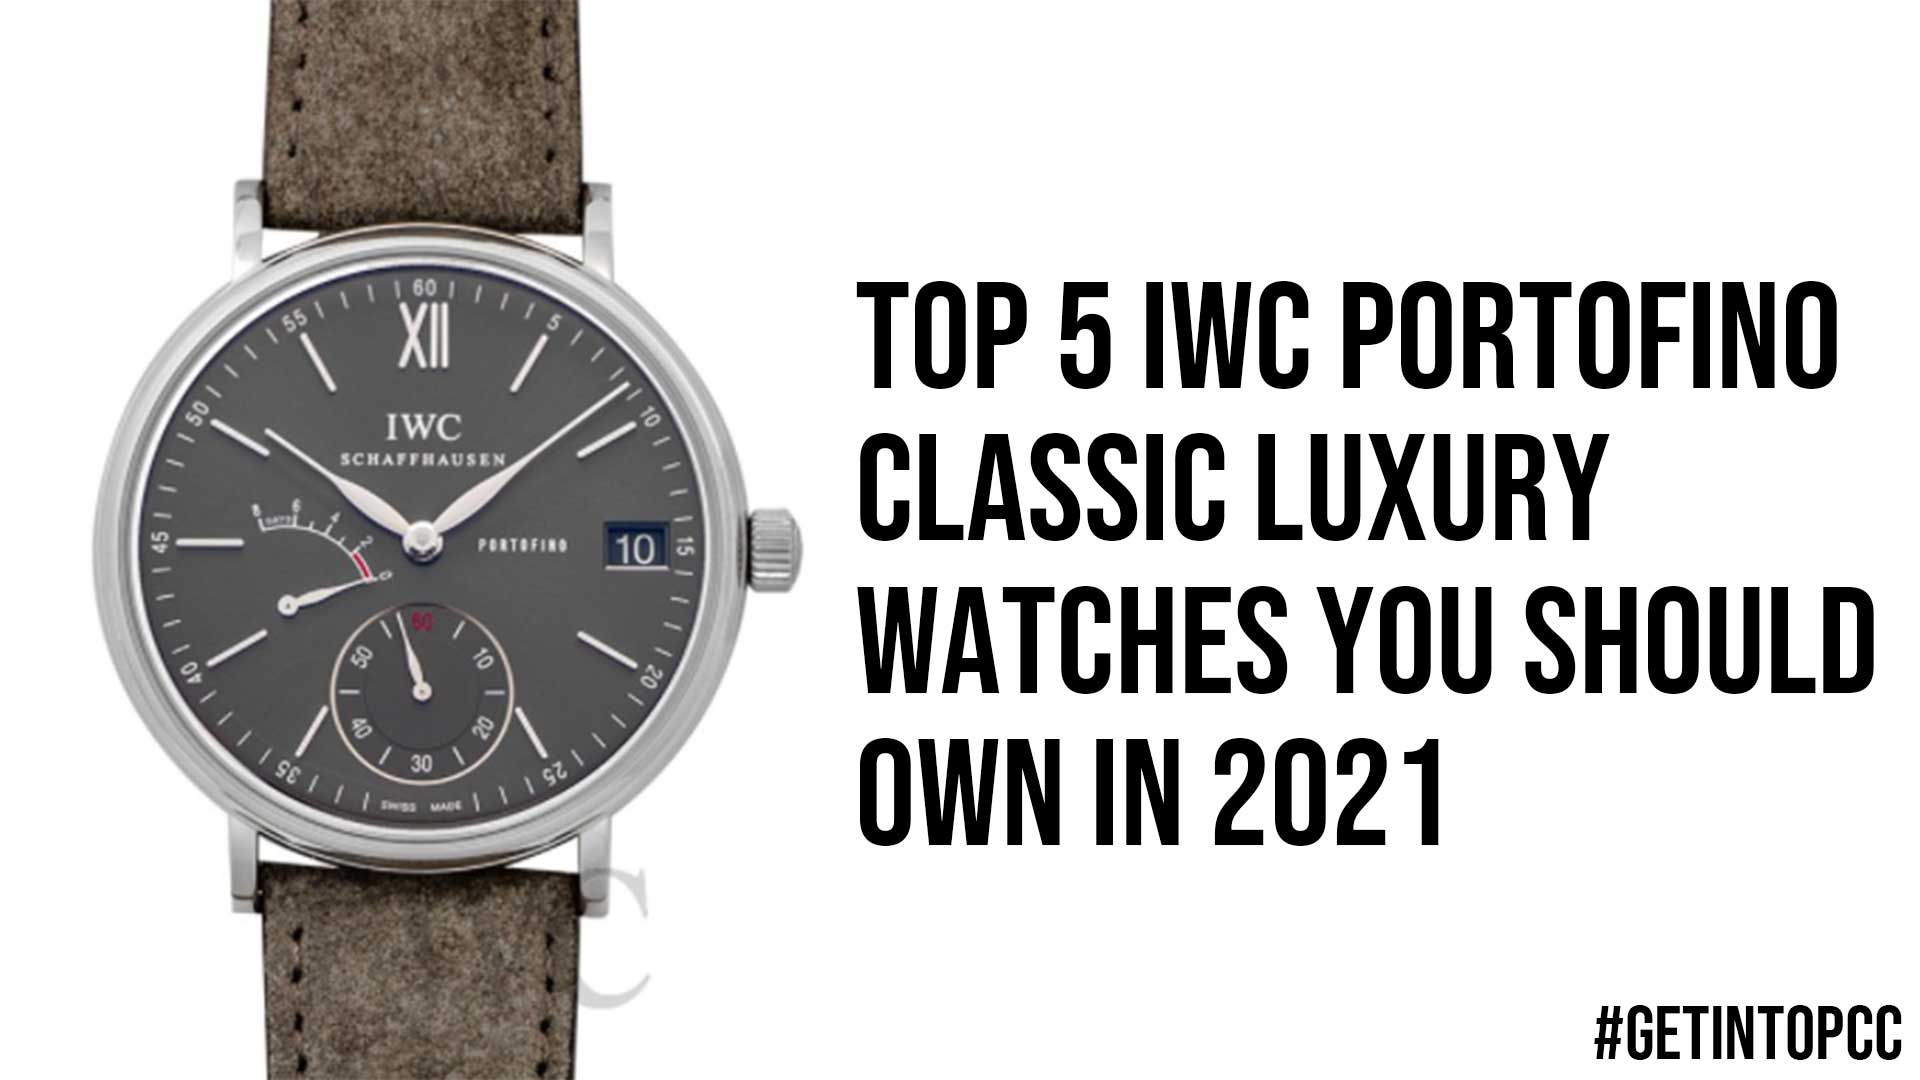 Top 5 IWC Portofino Classic Luxury Watches You Should Own in 2021